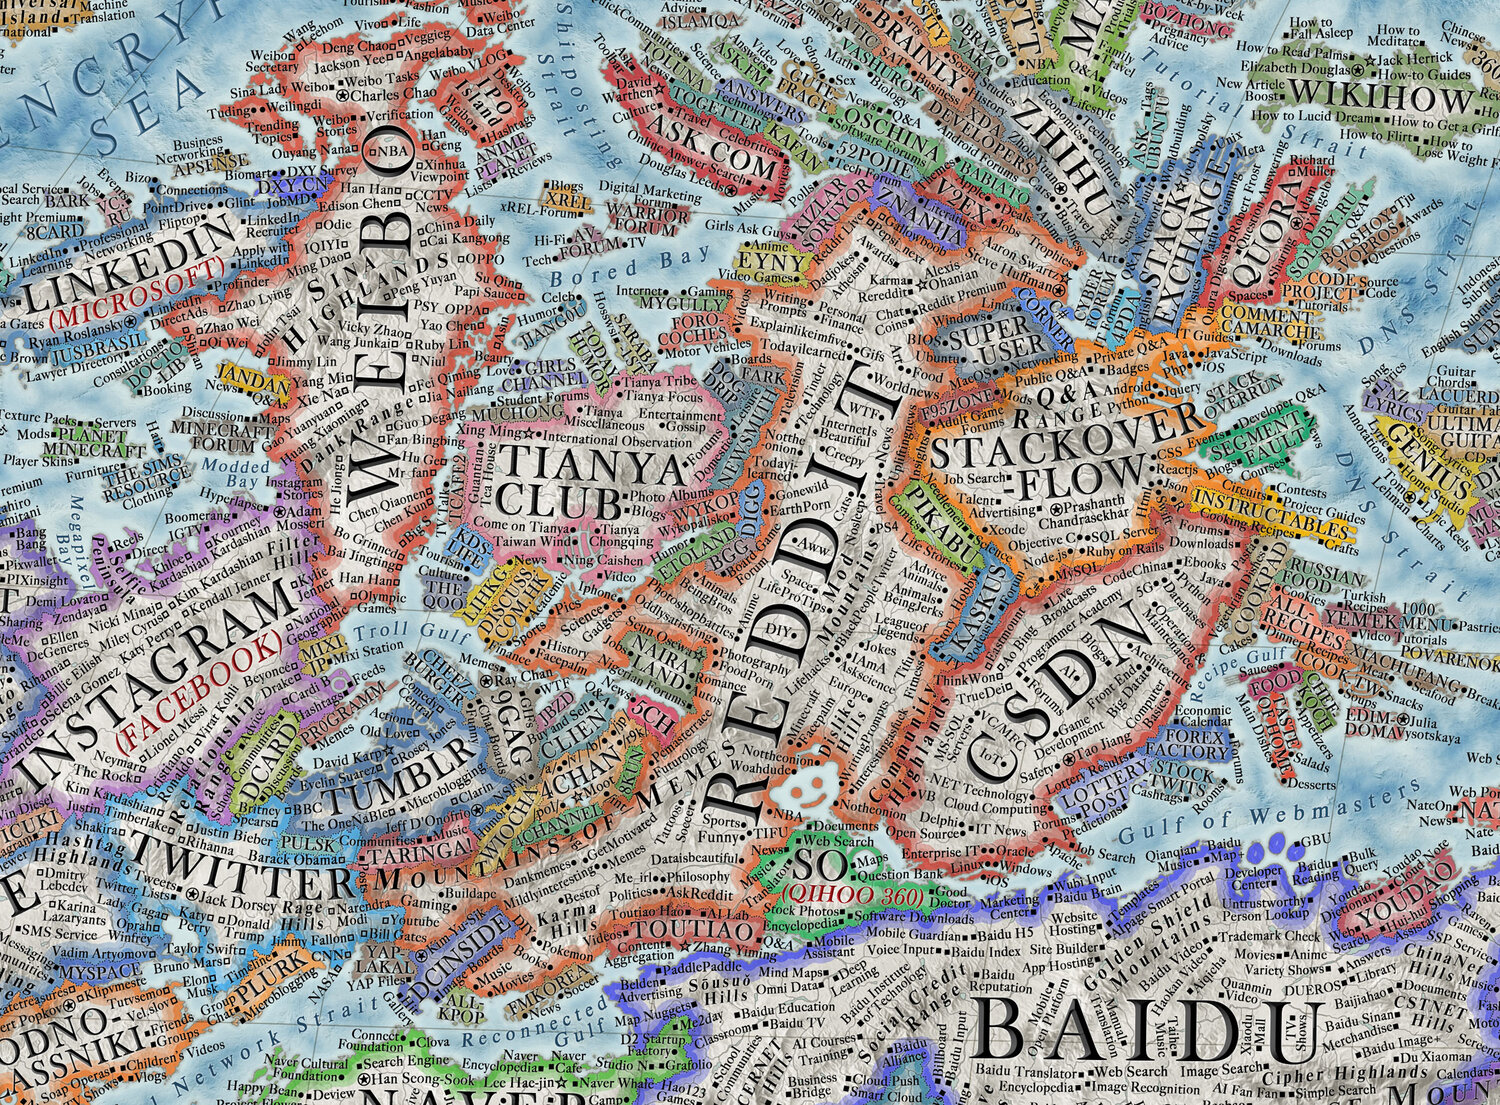 Map of the Internet — Halcyon Maps